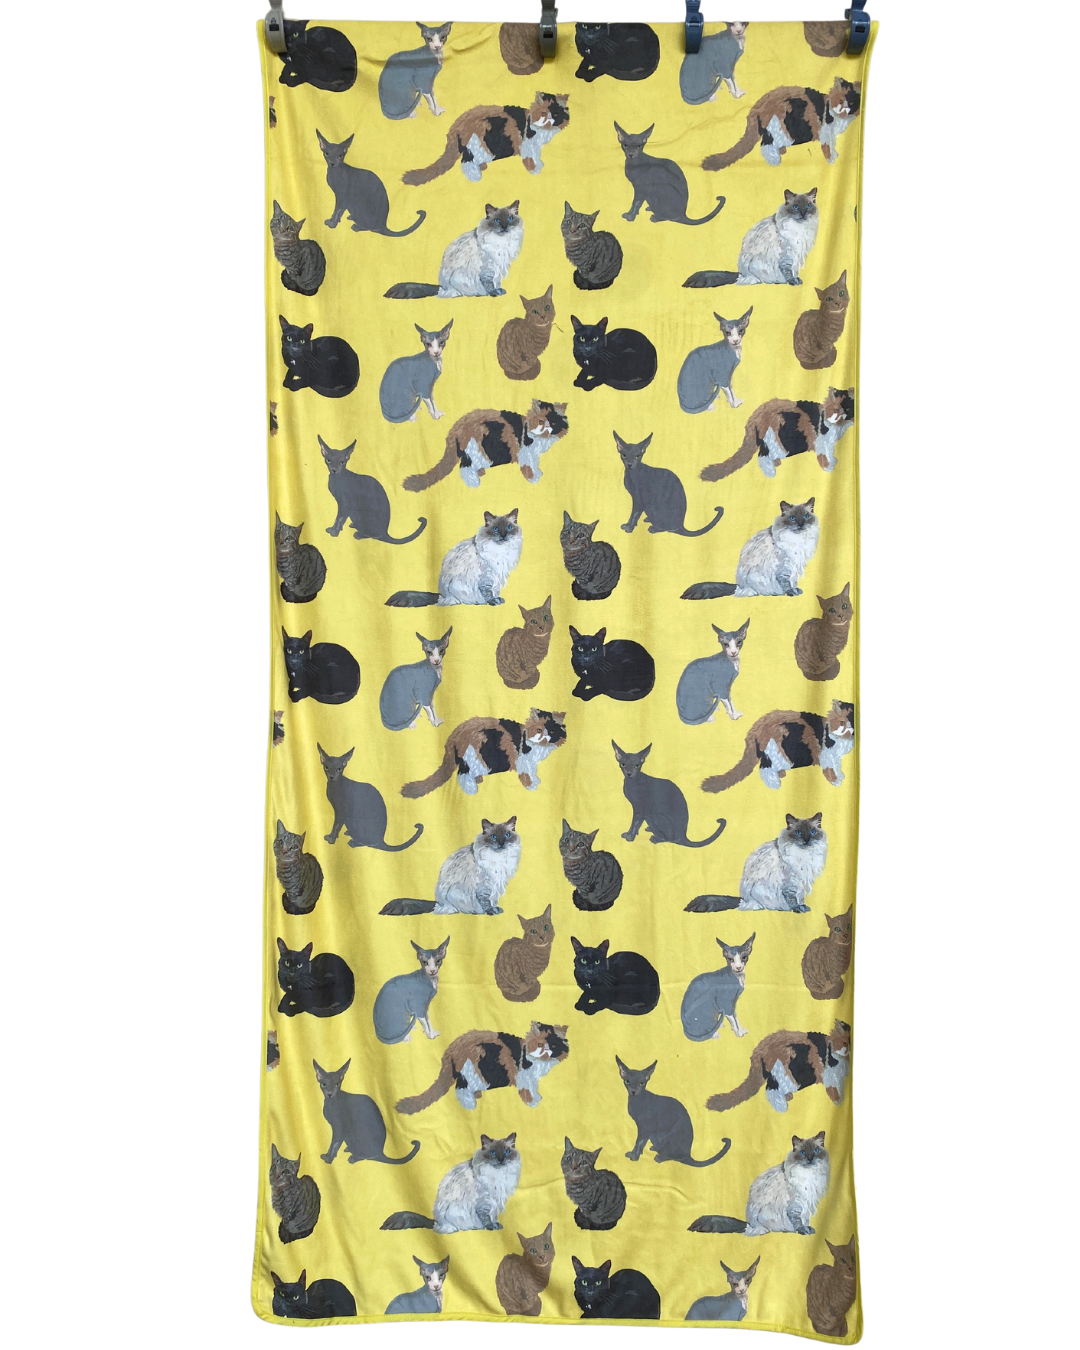 Adult Towel: My Cat Friends (Yellow Background)